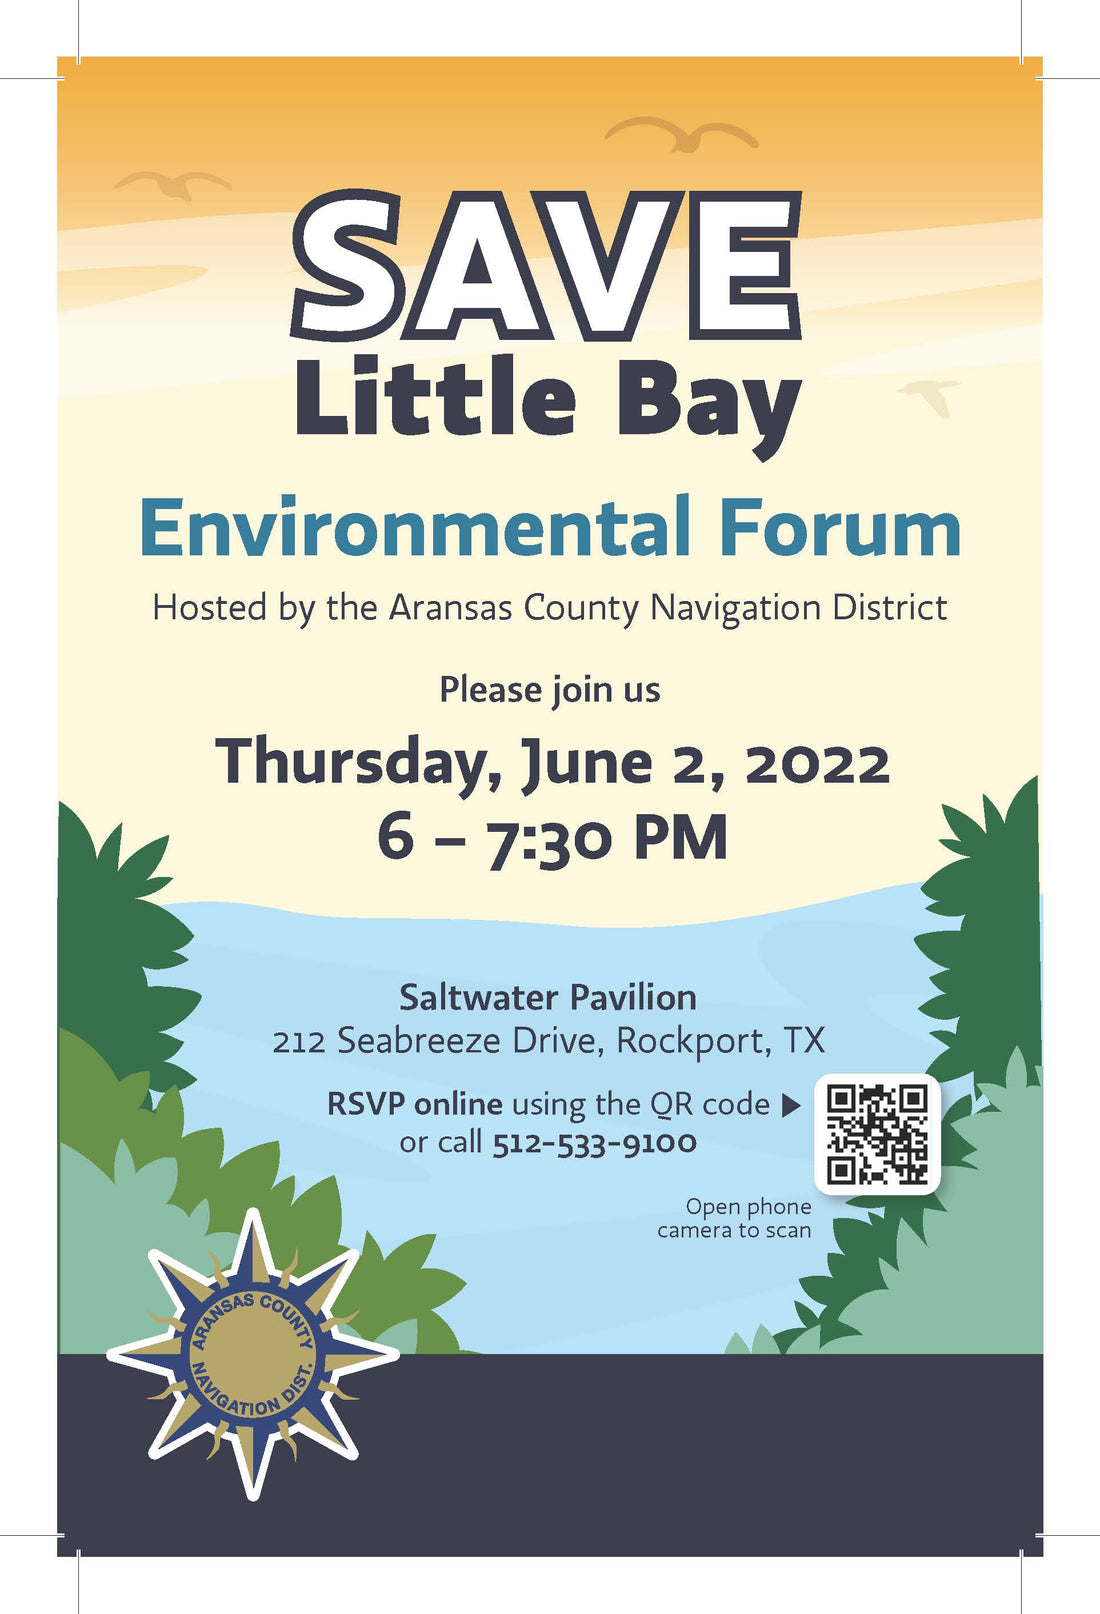 SAVE LITTLE BAY - Environmental Forum in Rockport